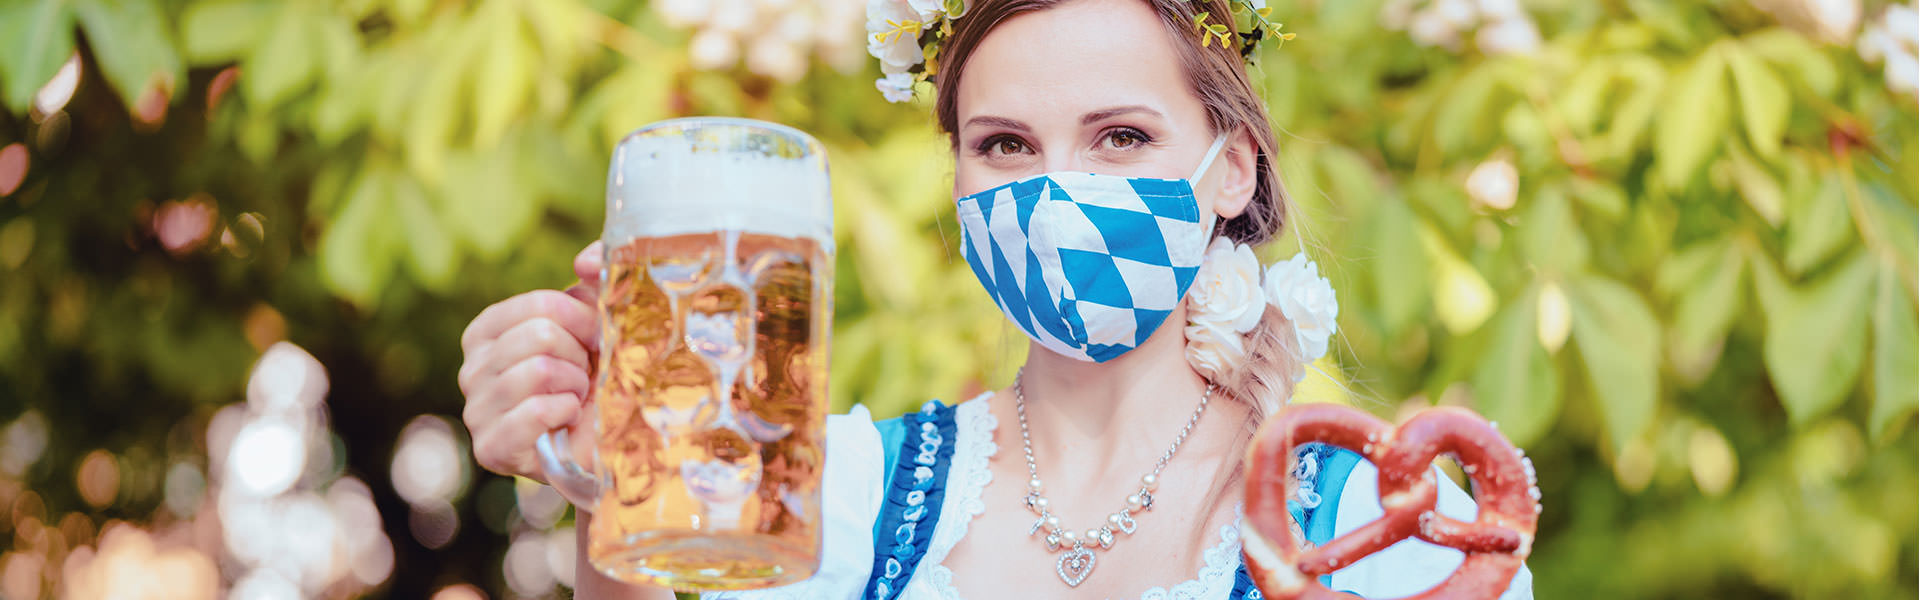 Corona-compliant corporate event: Mobile Oktoberfest on the FIrm grounds - celebrate safely and with distance 2021